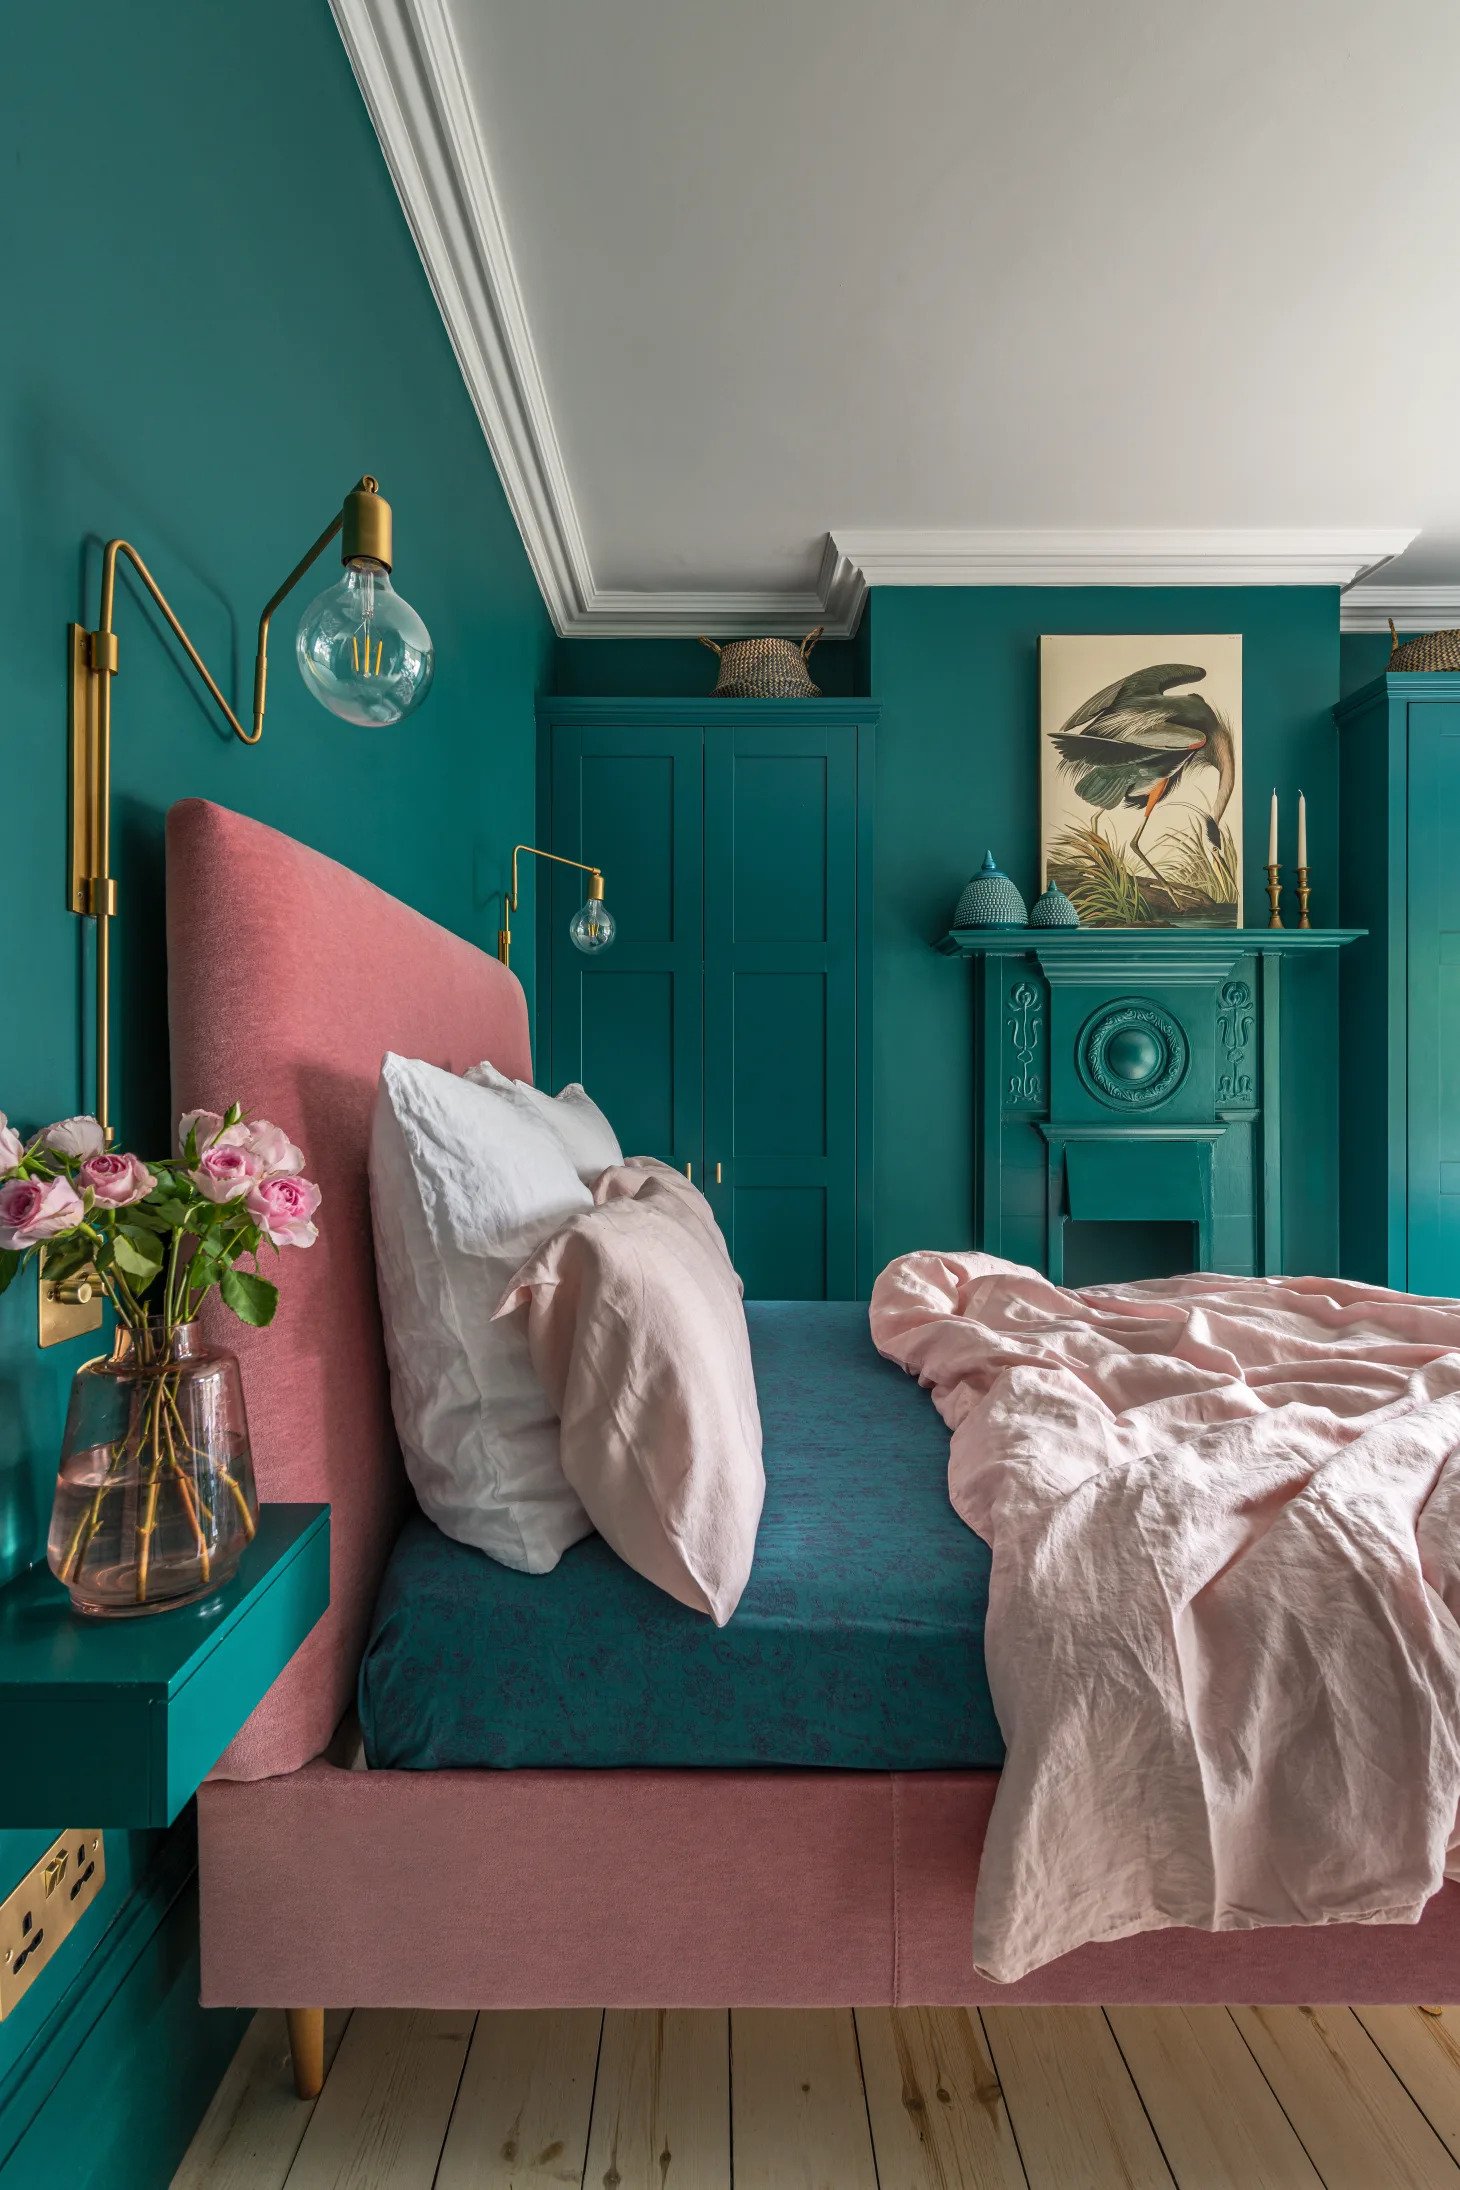 teal bedroom decor: ideas for any bedroom - decoholic